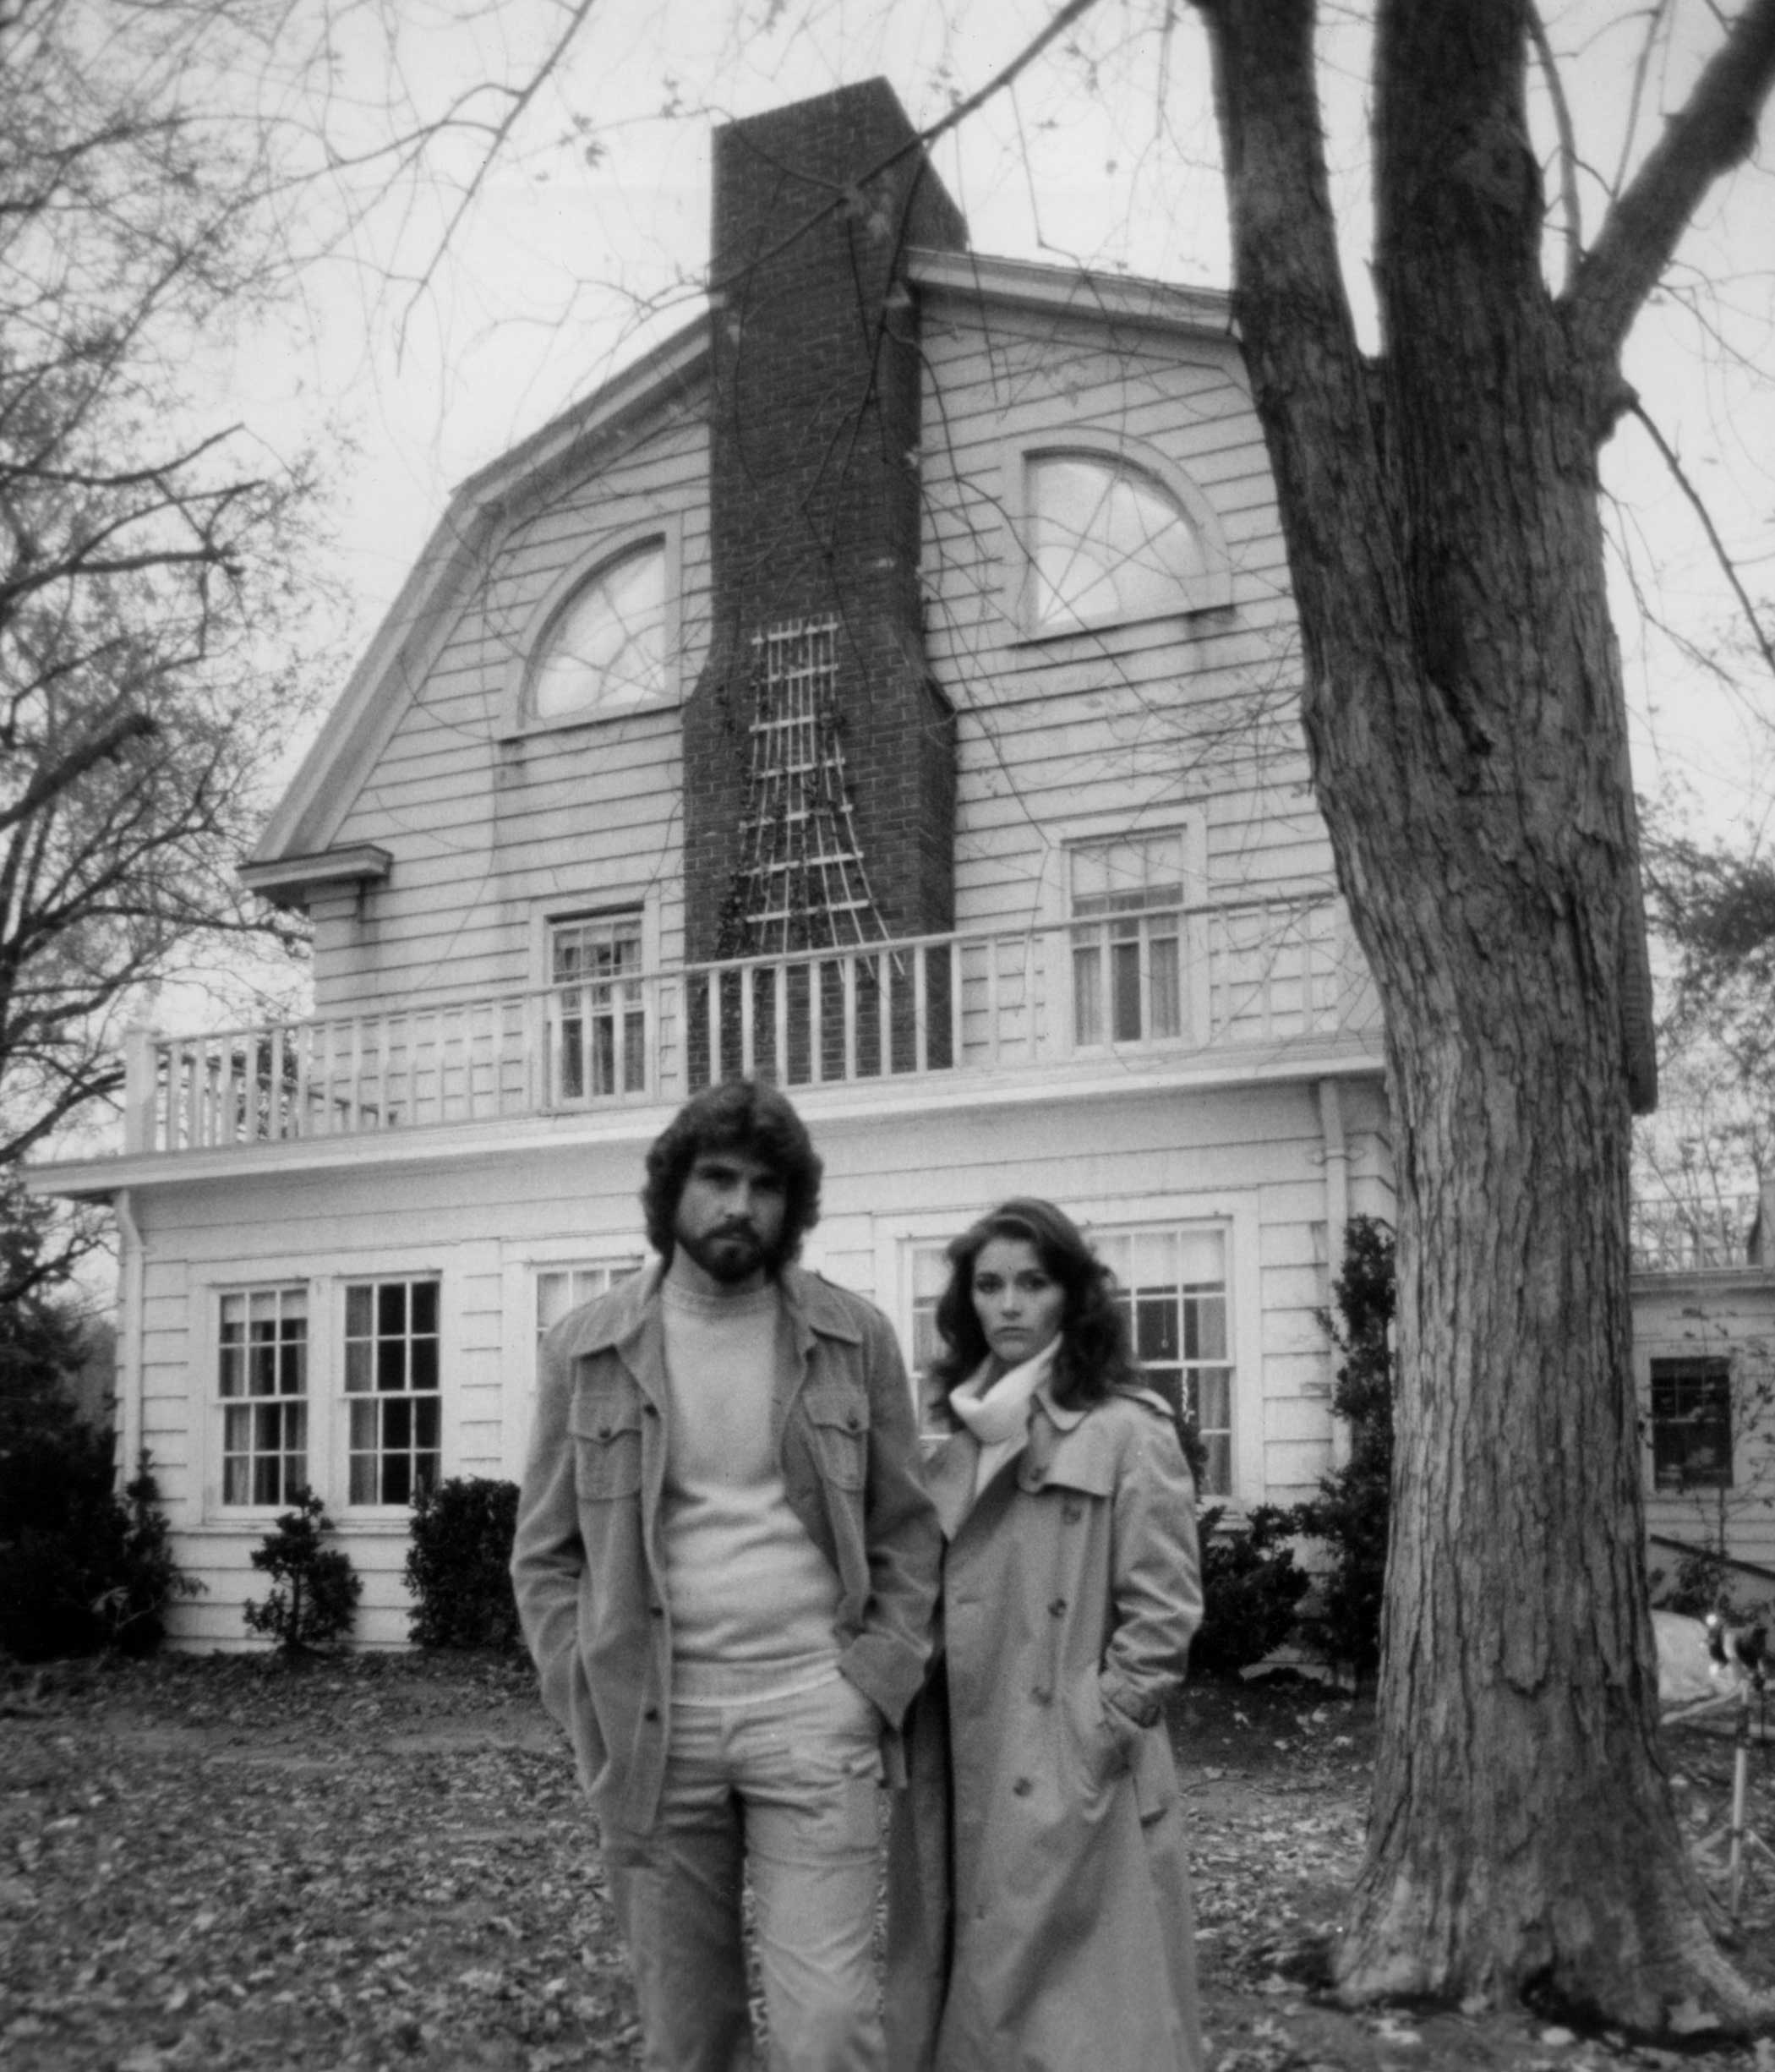 The Amityville Horror, 1979 The film is based on the alleged paranormal experiences that George and Kathy Lutz experienced after moving into their three-story colonial home in Amityville, N.Y. in 1975. The year before, the house had been the scene of a terrible mass murder, when 23-year-old Ronnie DeFeo killed both his parents and four siblings.